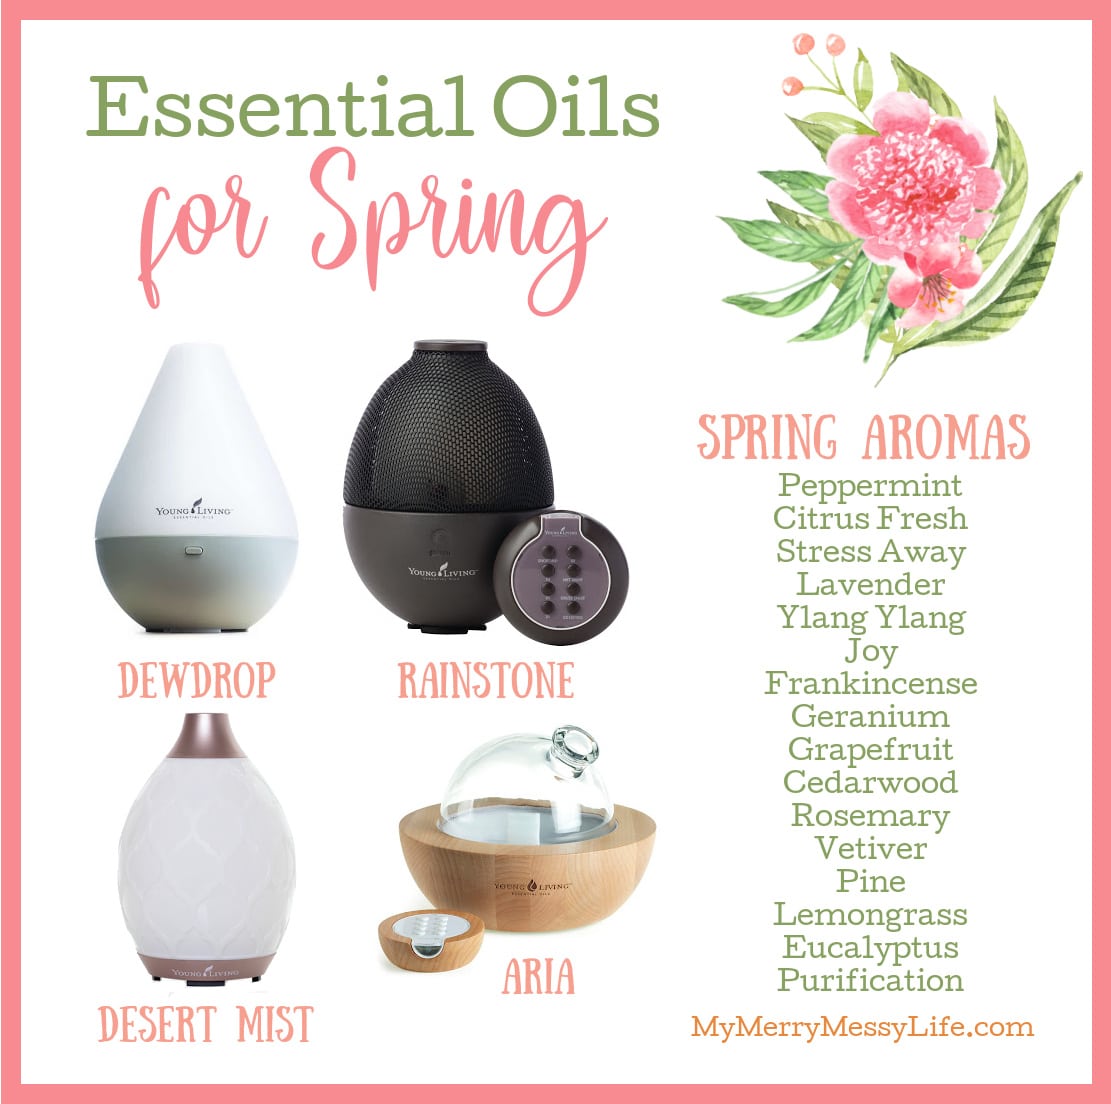 Top Essential Oil Aromas for Spring - Peppermint, Lavender, Ylang Ylang, Frankincense, Grapefruit, Geranium, Vetiver, Pine, Stress Away and more!